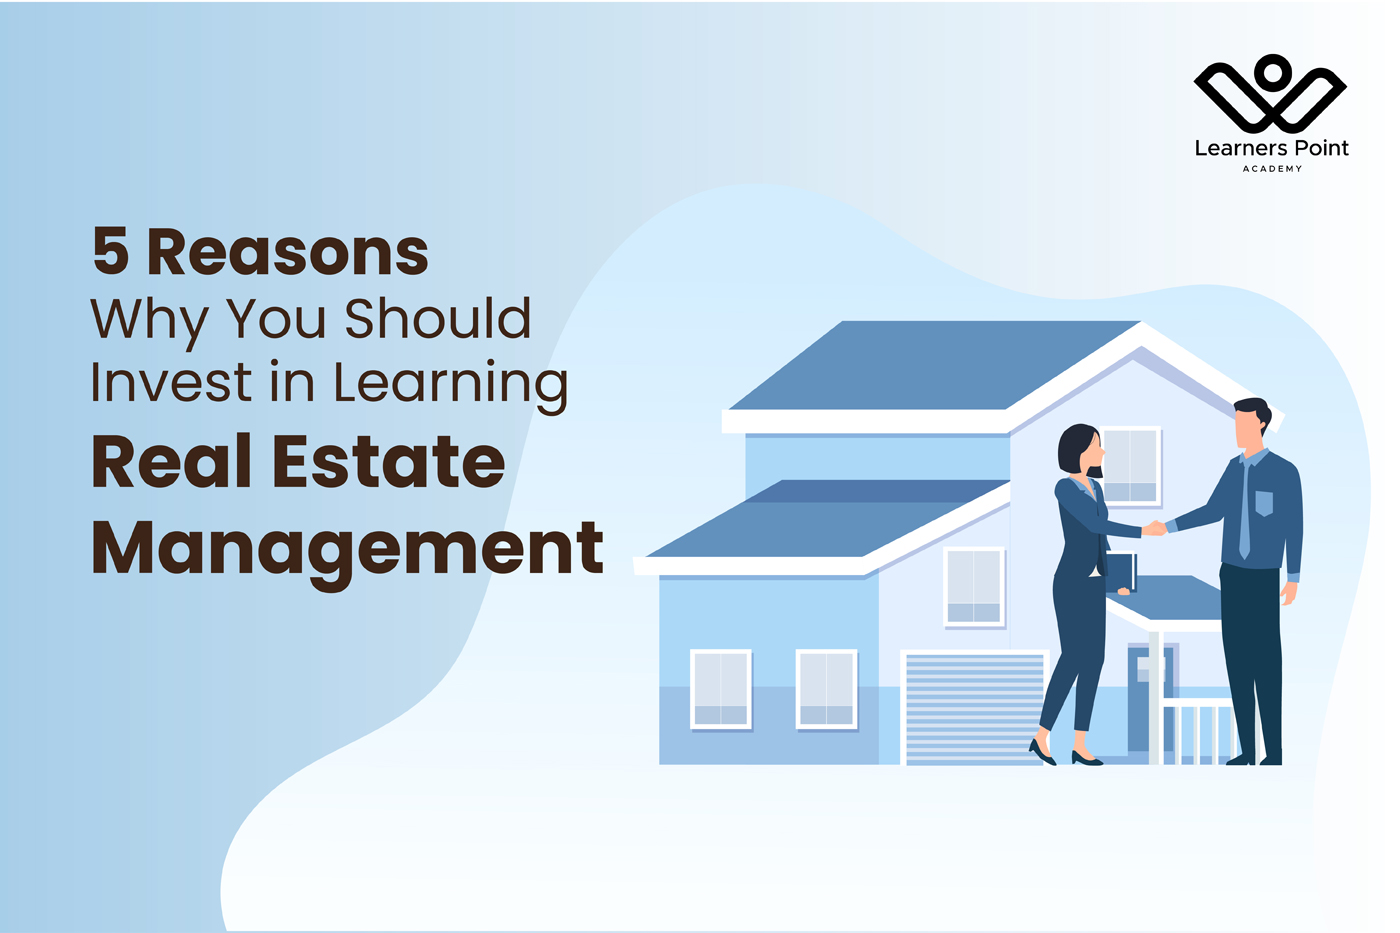 5 Reasons Why You Should Invest in Learning Real Estate Management